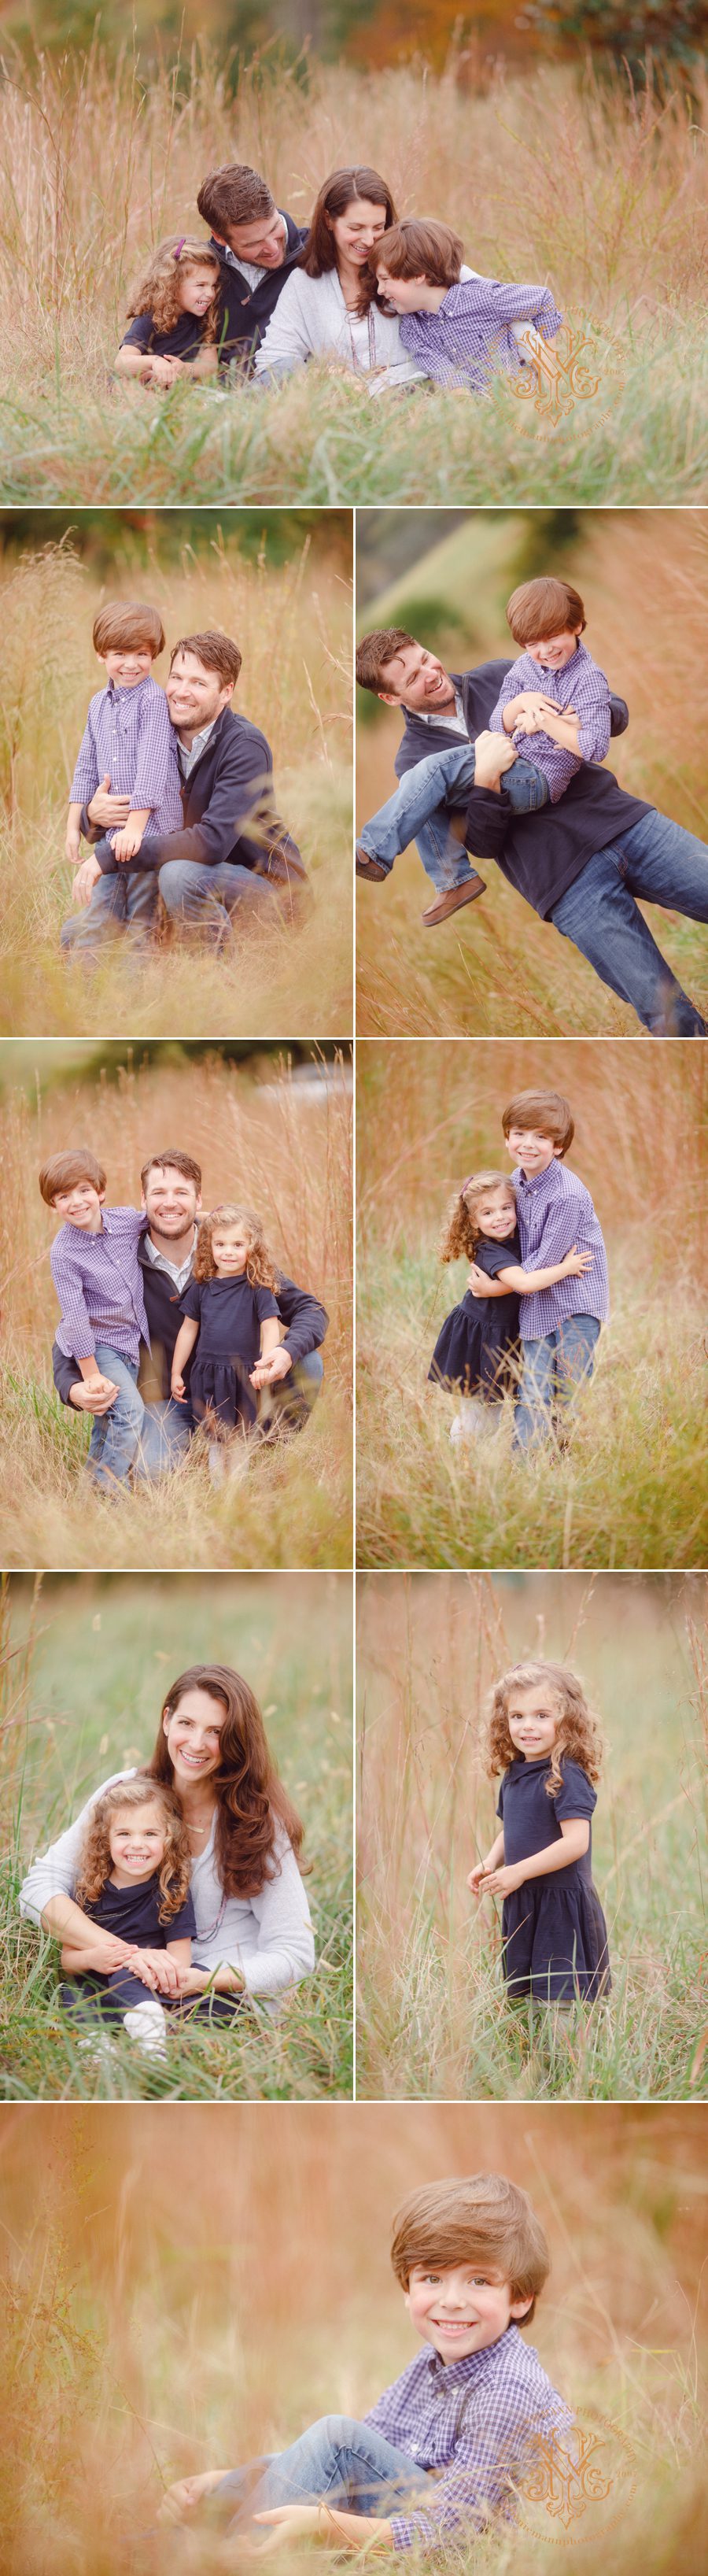 Beautiful family pictures taken in a field in Athens, GA.